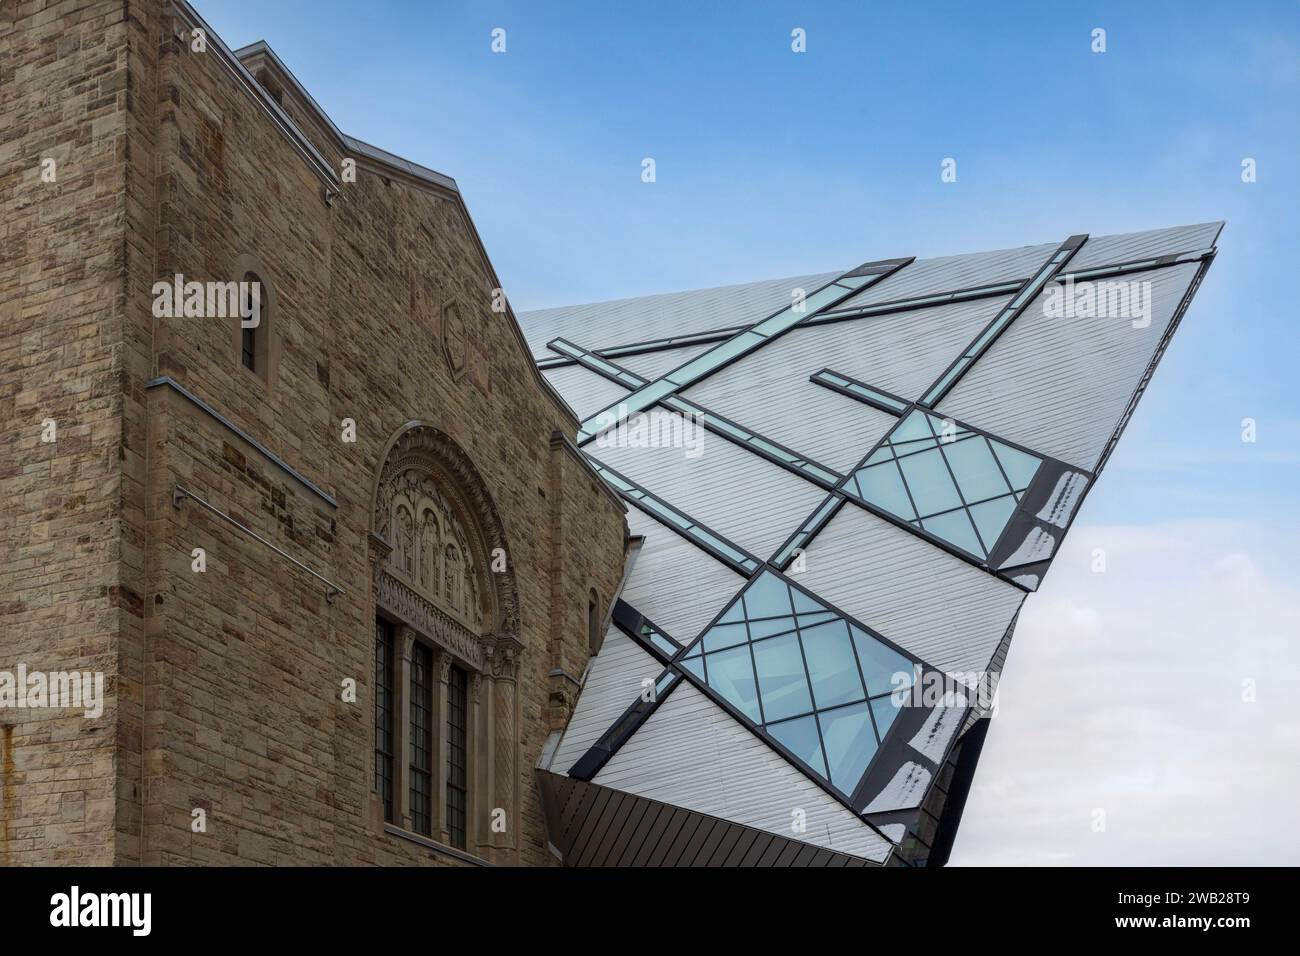 The Royal Ontario Museum (ROM) is a vast and comprehensive museum of art, world culture, and natural history located in Toronto, Canada. Stock Photo